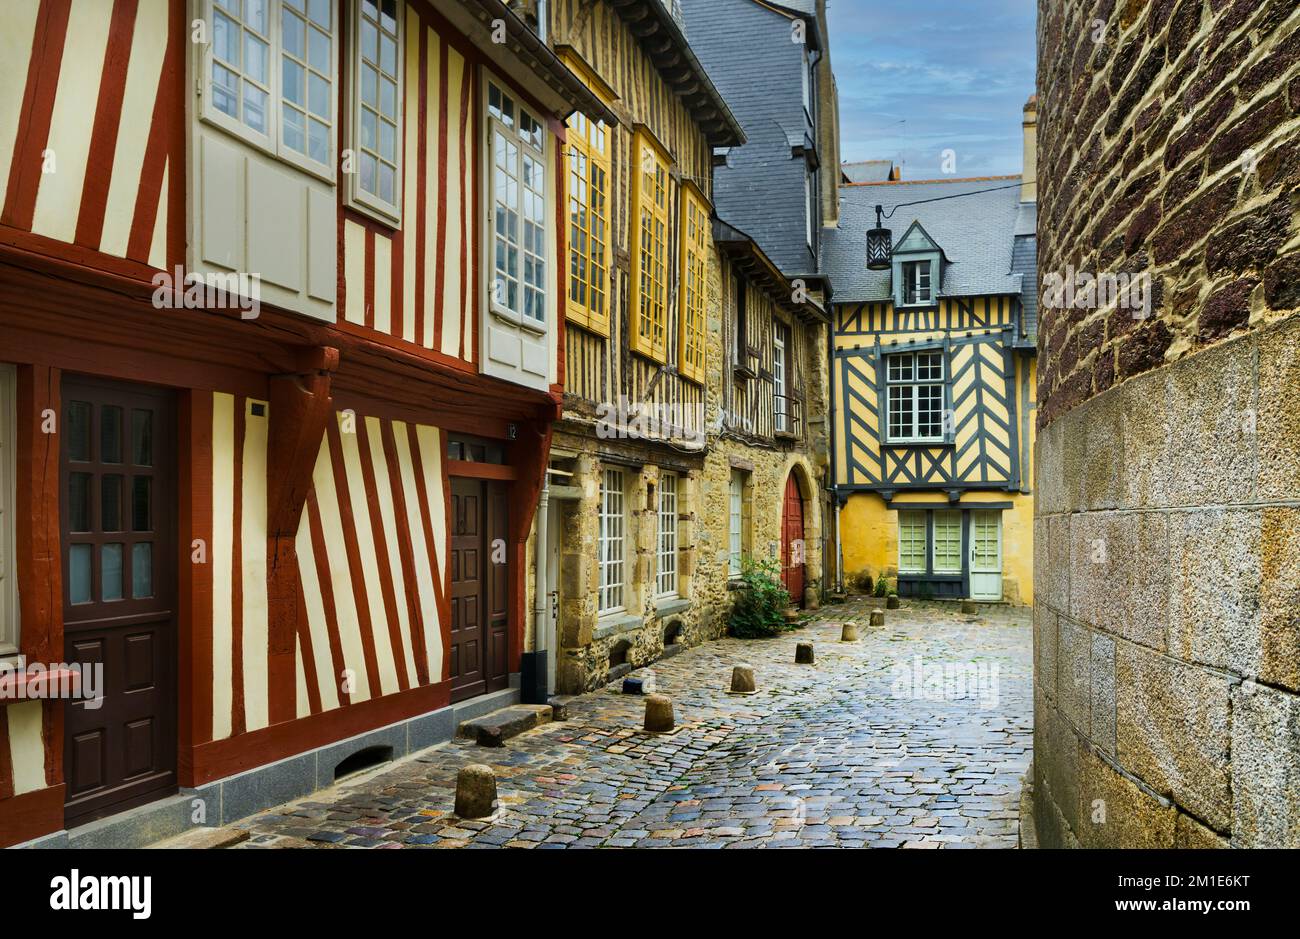 Medieval street with typical half-timbered houses in the French city of Rennes. Stock Photo